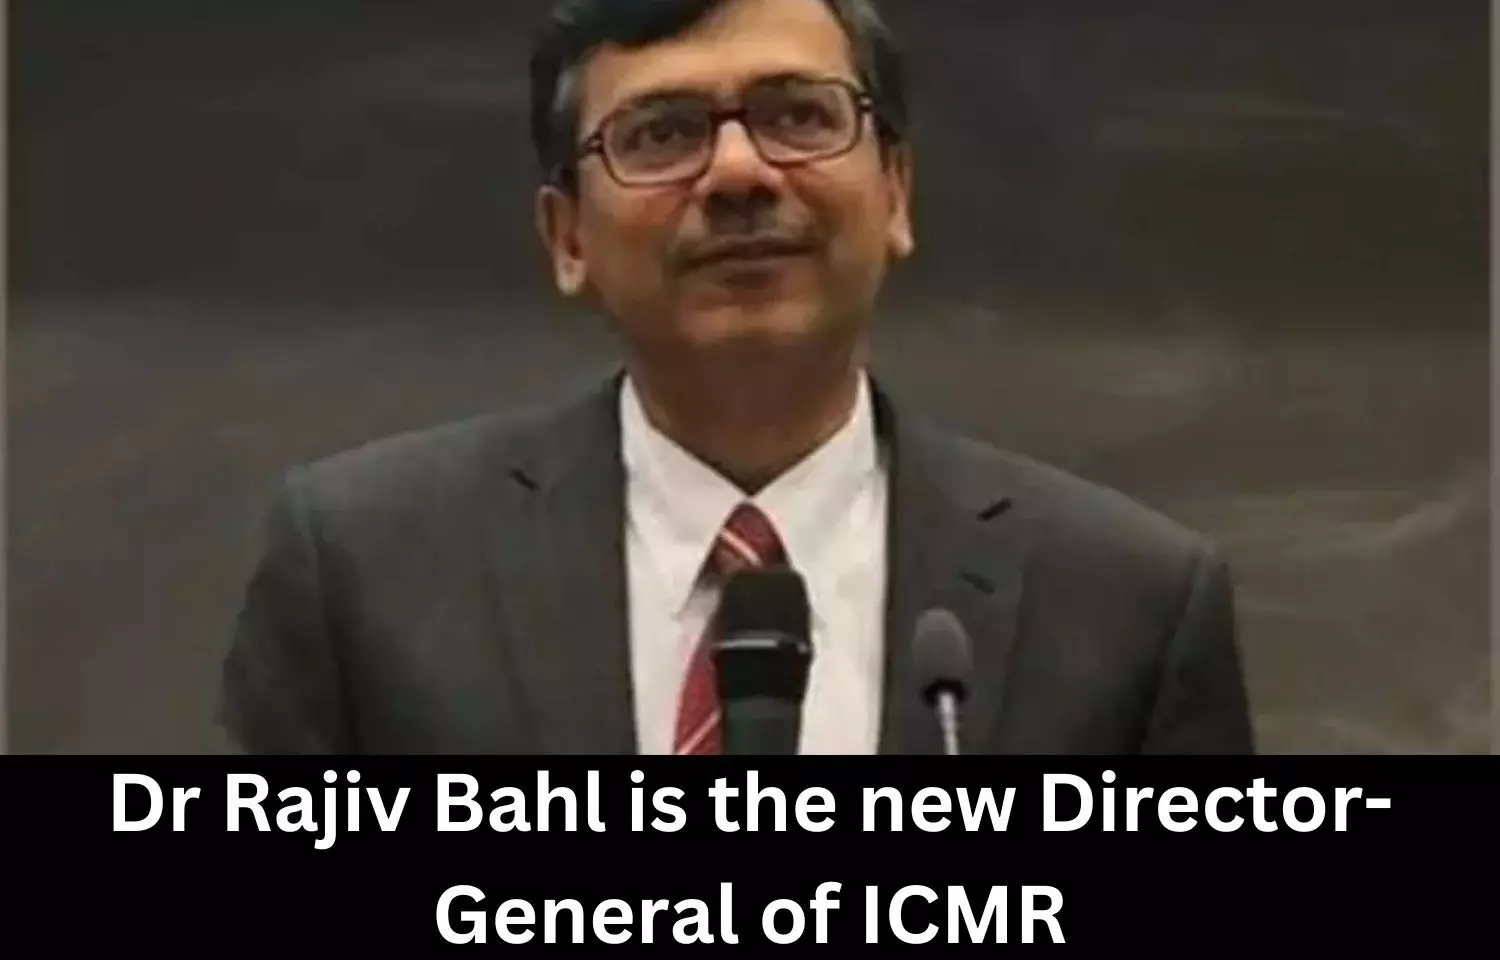 Dr Rajiv Bahl appointed as new Director-General of ICMR